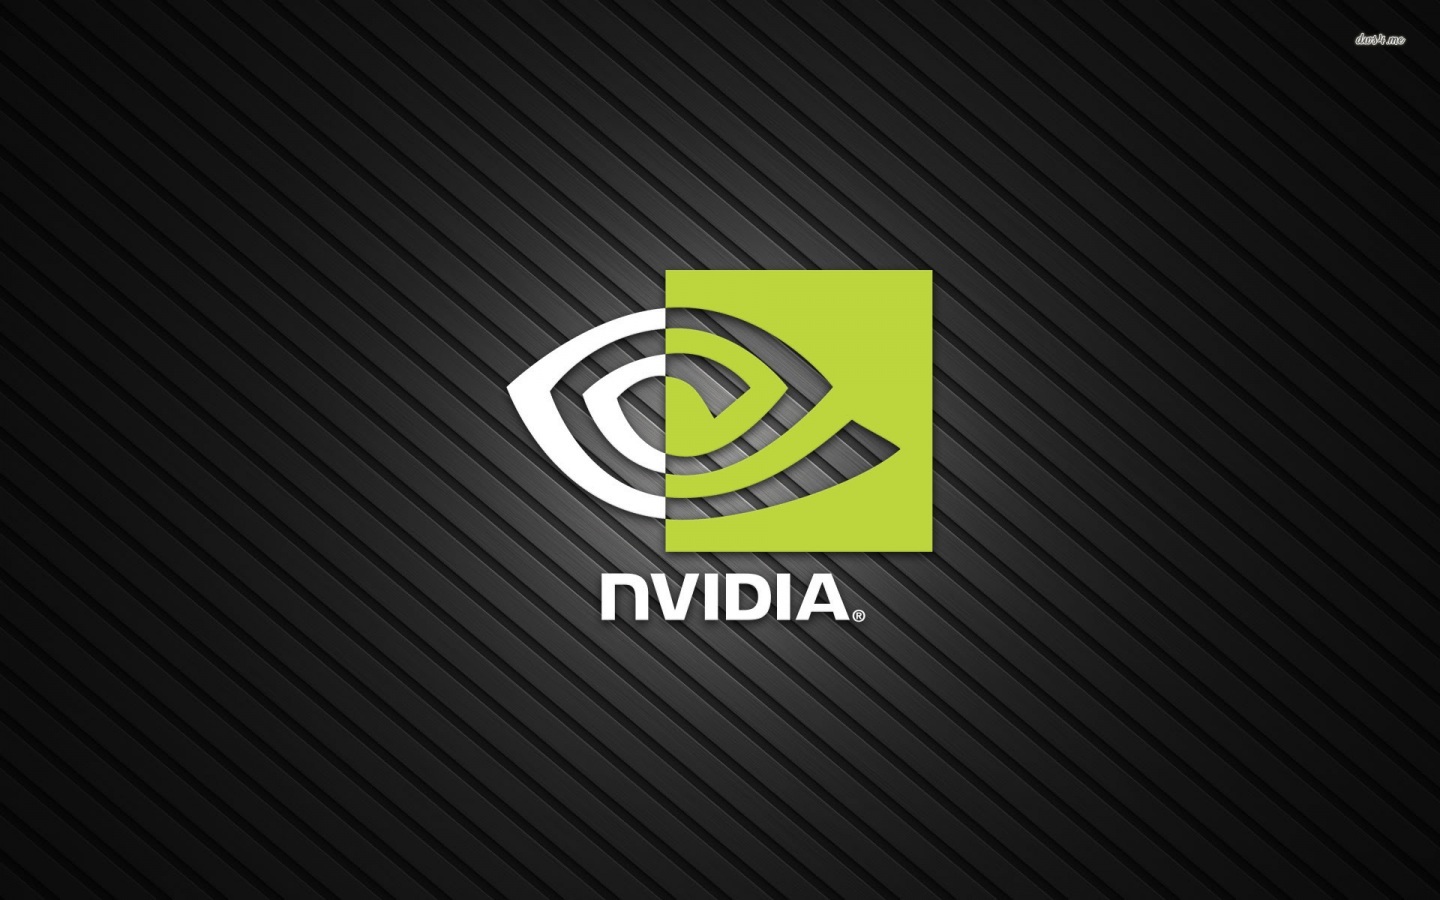 Nvidia Puter Wallpaper 1440p Photo Shared By Dolly Fans